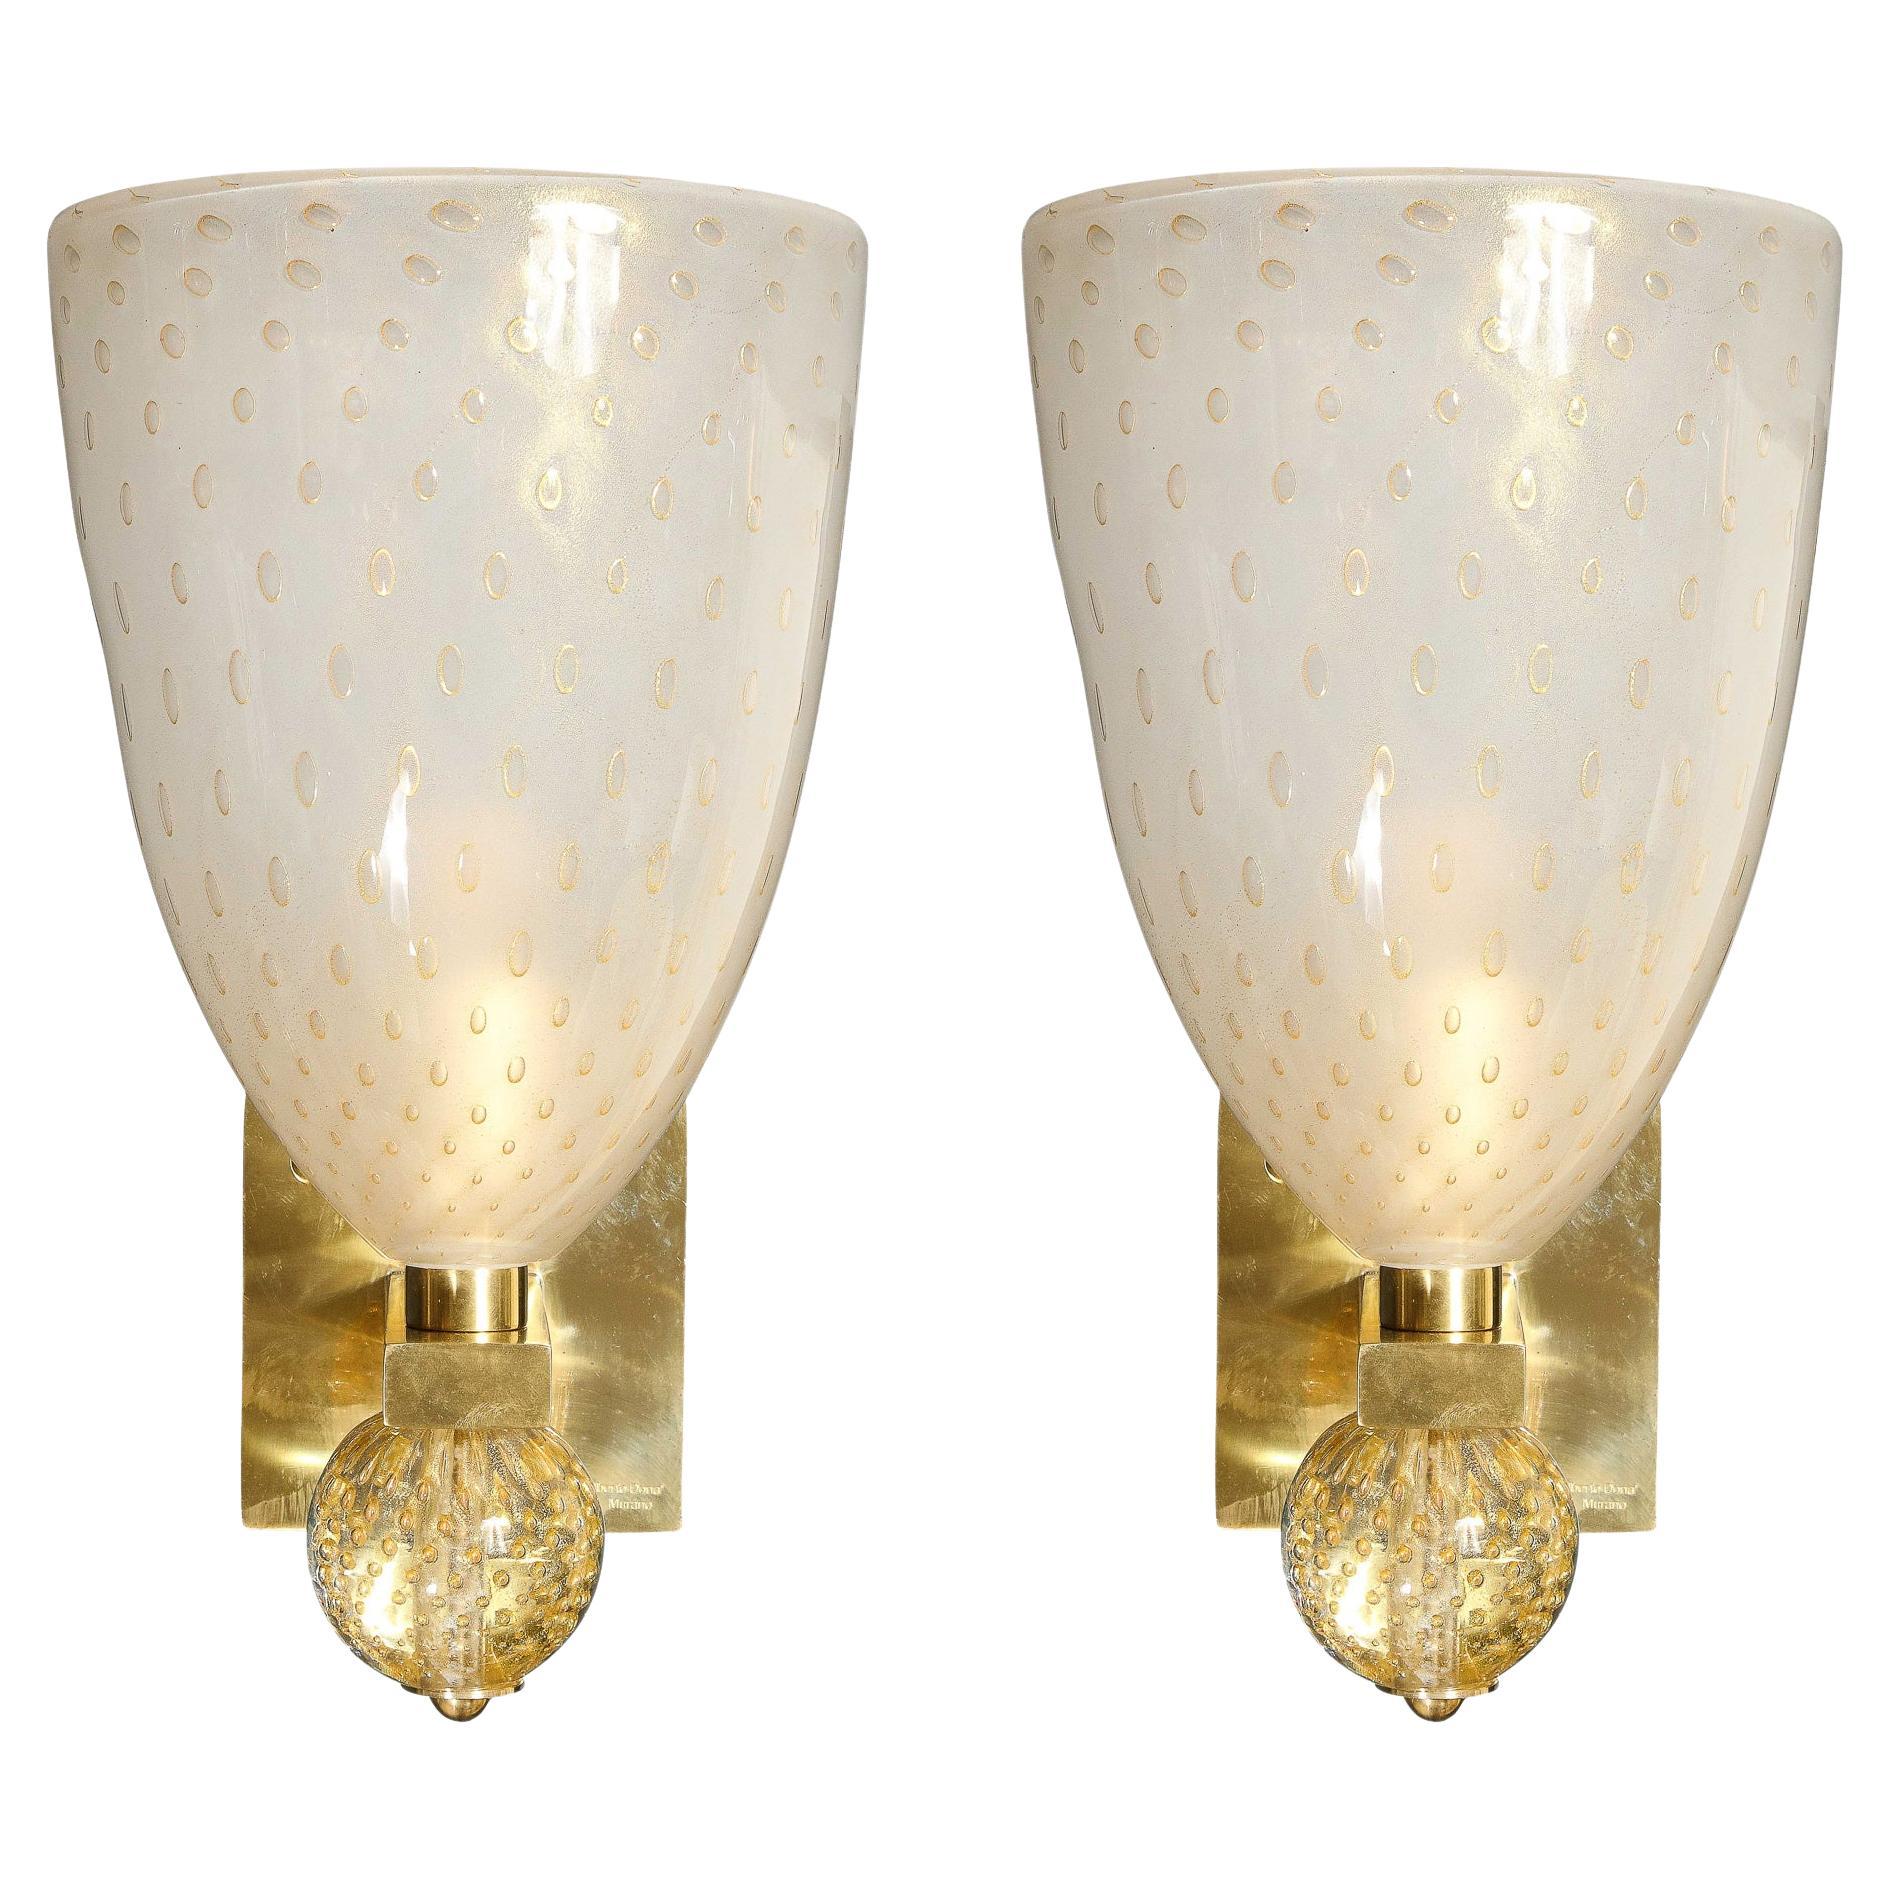 Modernist Brass Sconces with Hand Blown Murano 24-Karat Gold Glass with Murines 